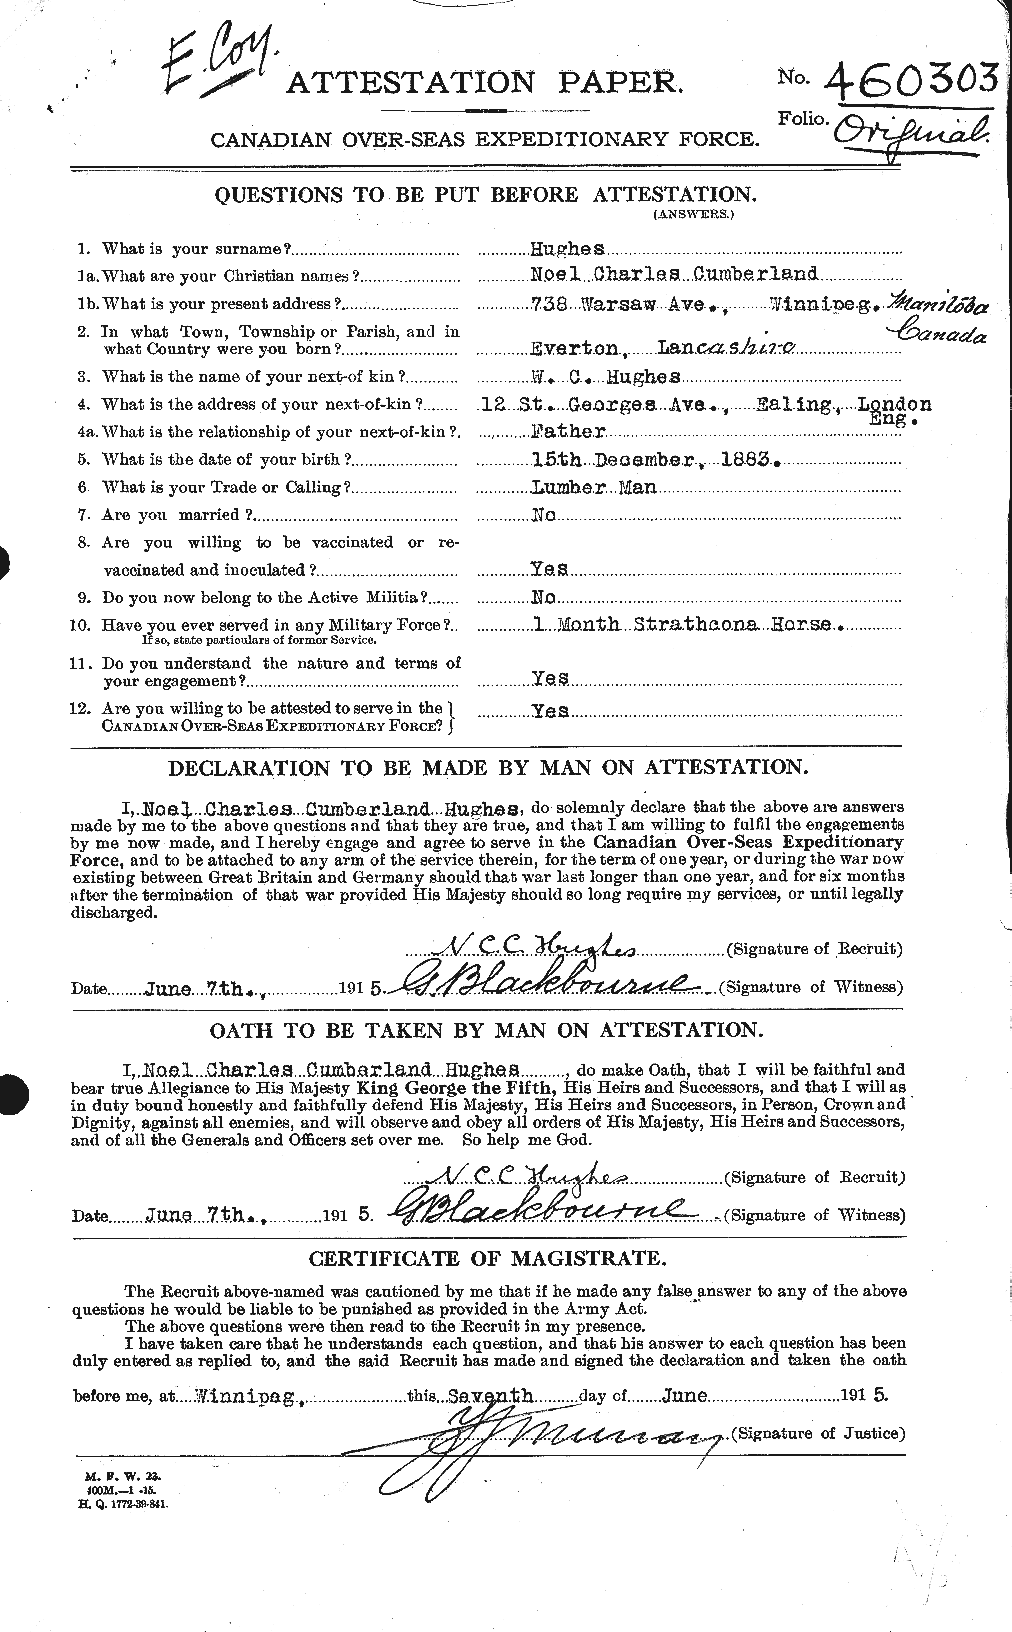 Personnel Records of the First World War - CEF 404129a